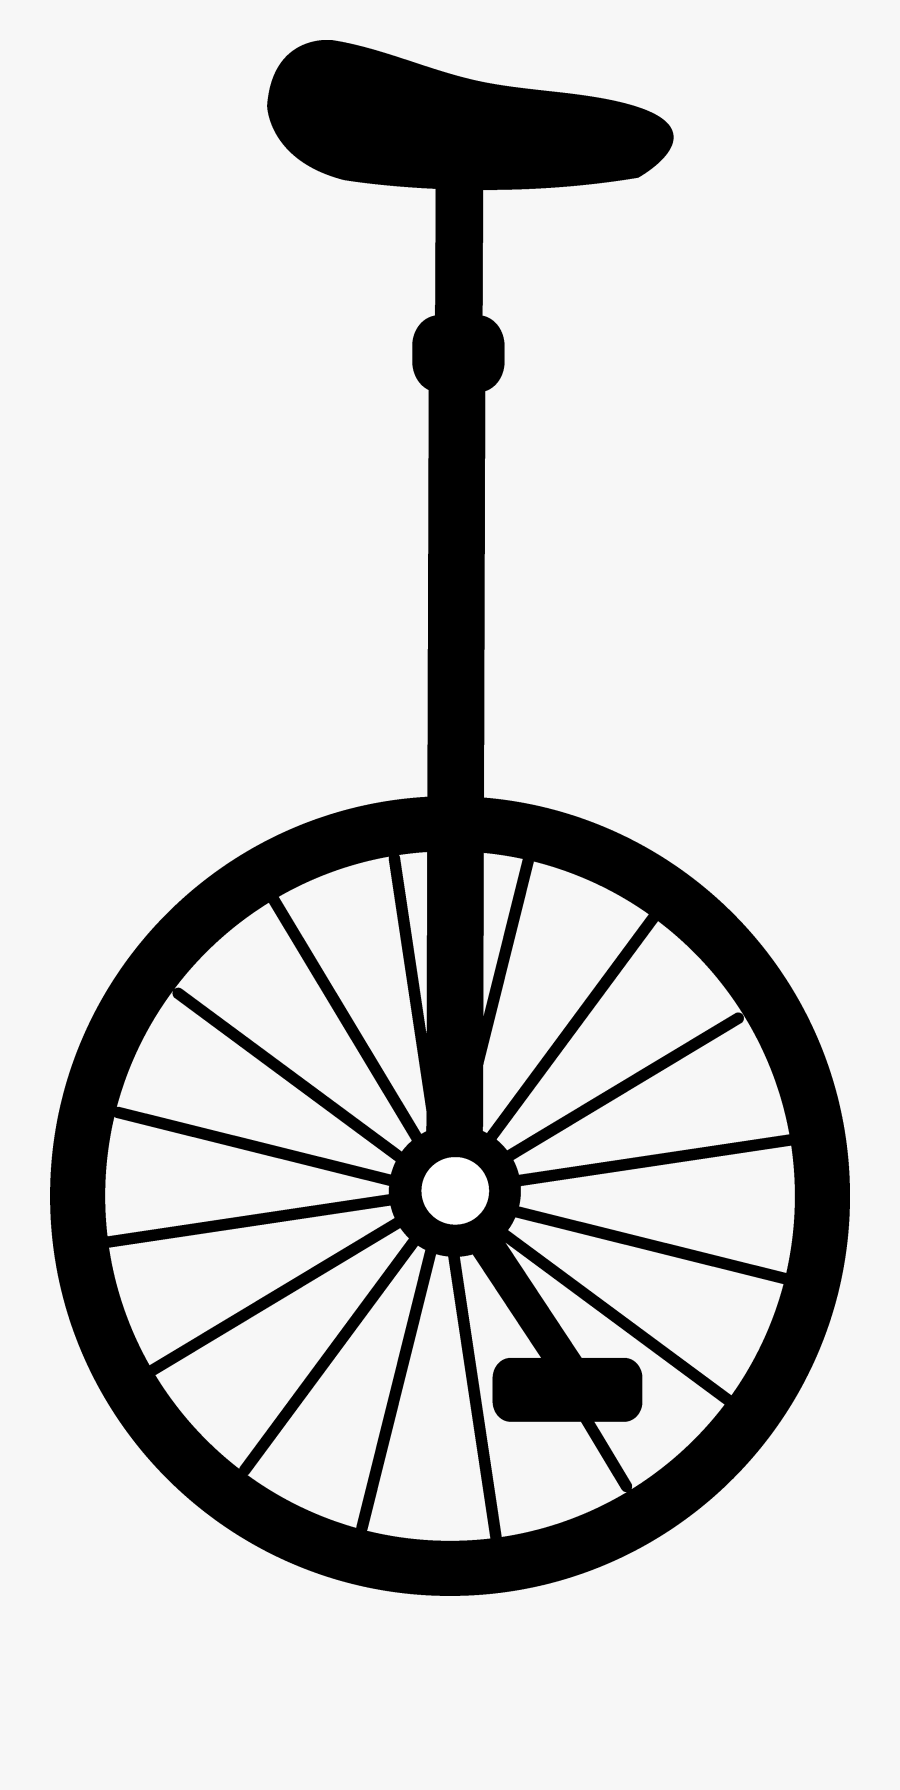 Unicycle - Clipart - Unicycle Black And White Clipart, Transparent Clipart